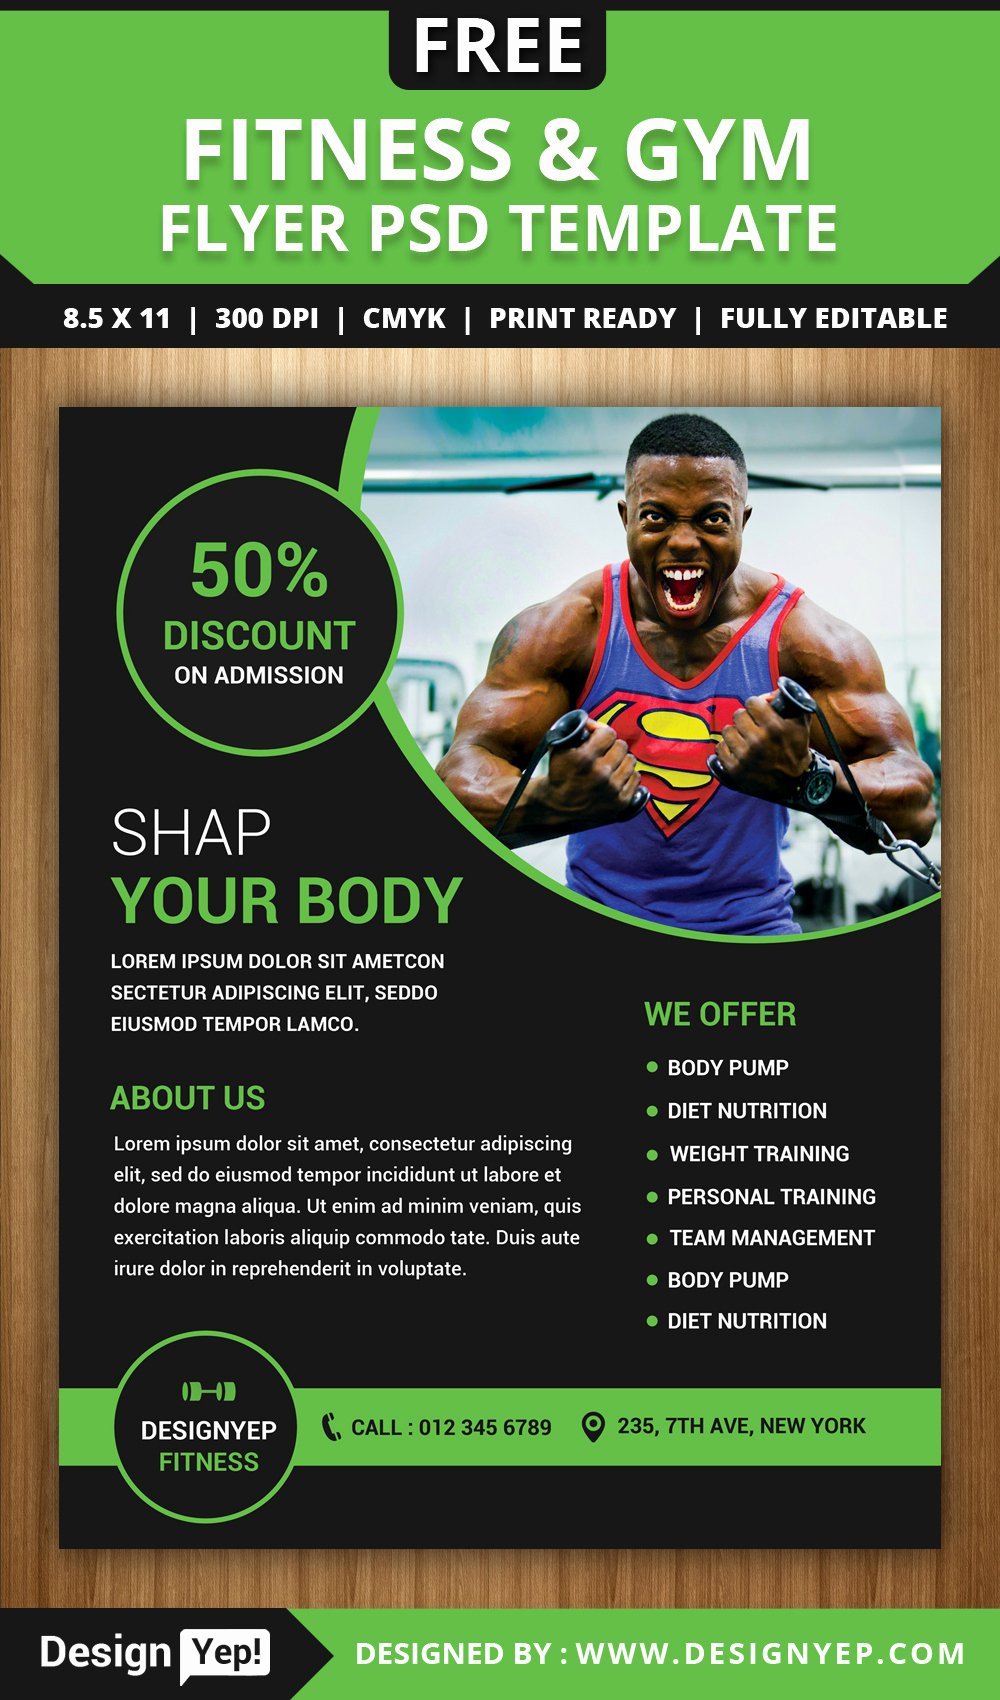 Free Fitness Flyer Template Luxury Free Gym and Fitness Flyer Psd Template Designyep